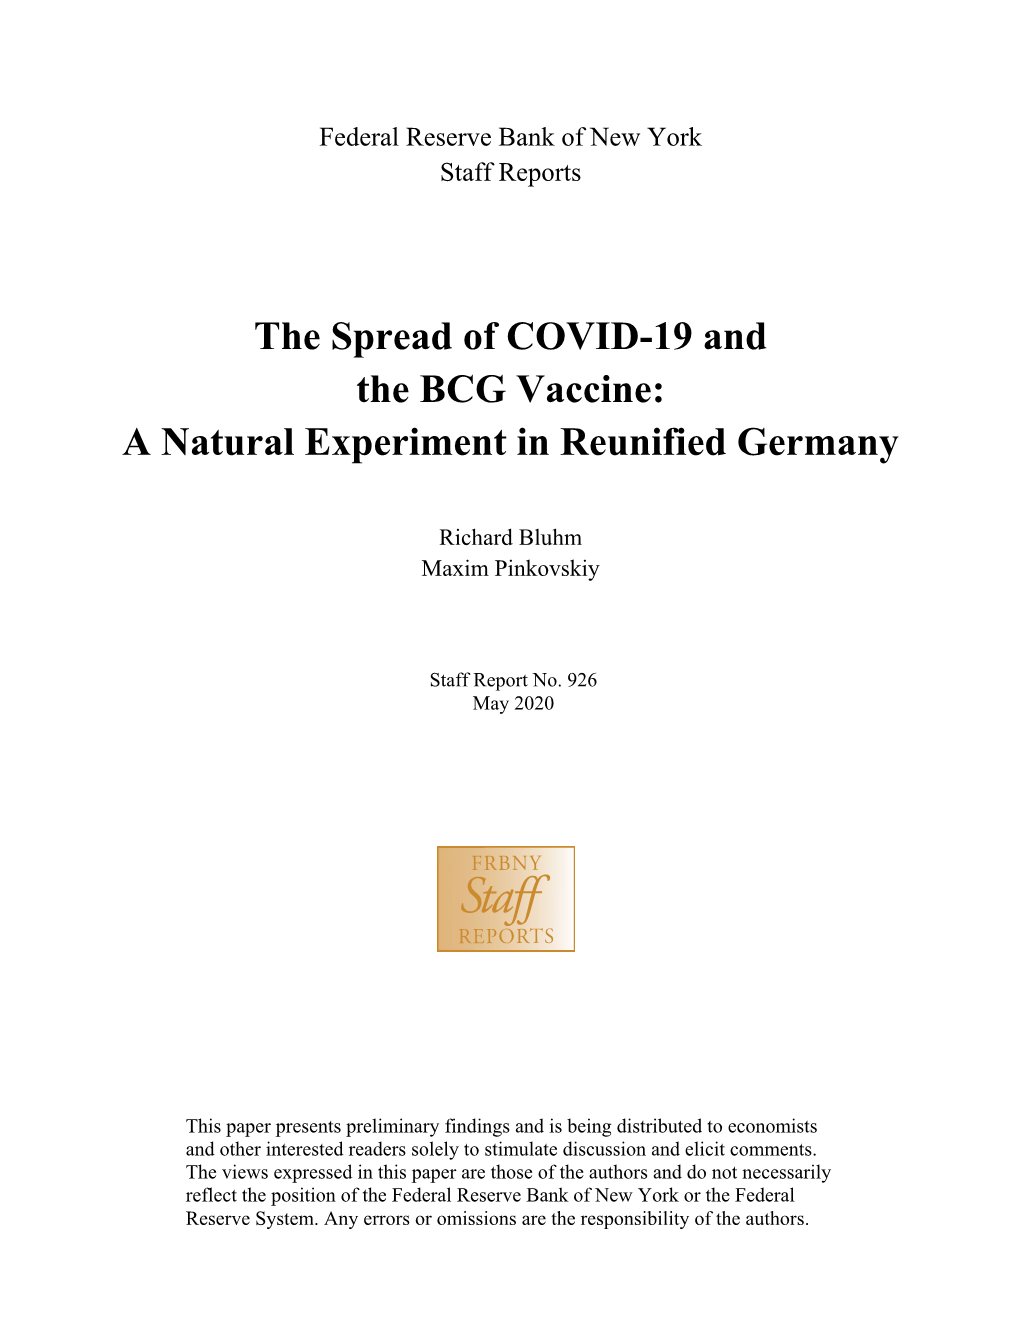 The Spread of COVID-19 and the BCG Vaccine: a Natural Experiment in Reunified Germany